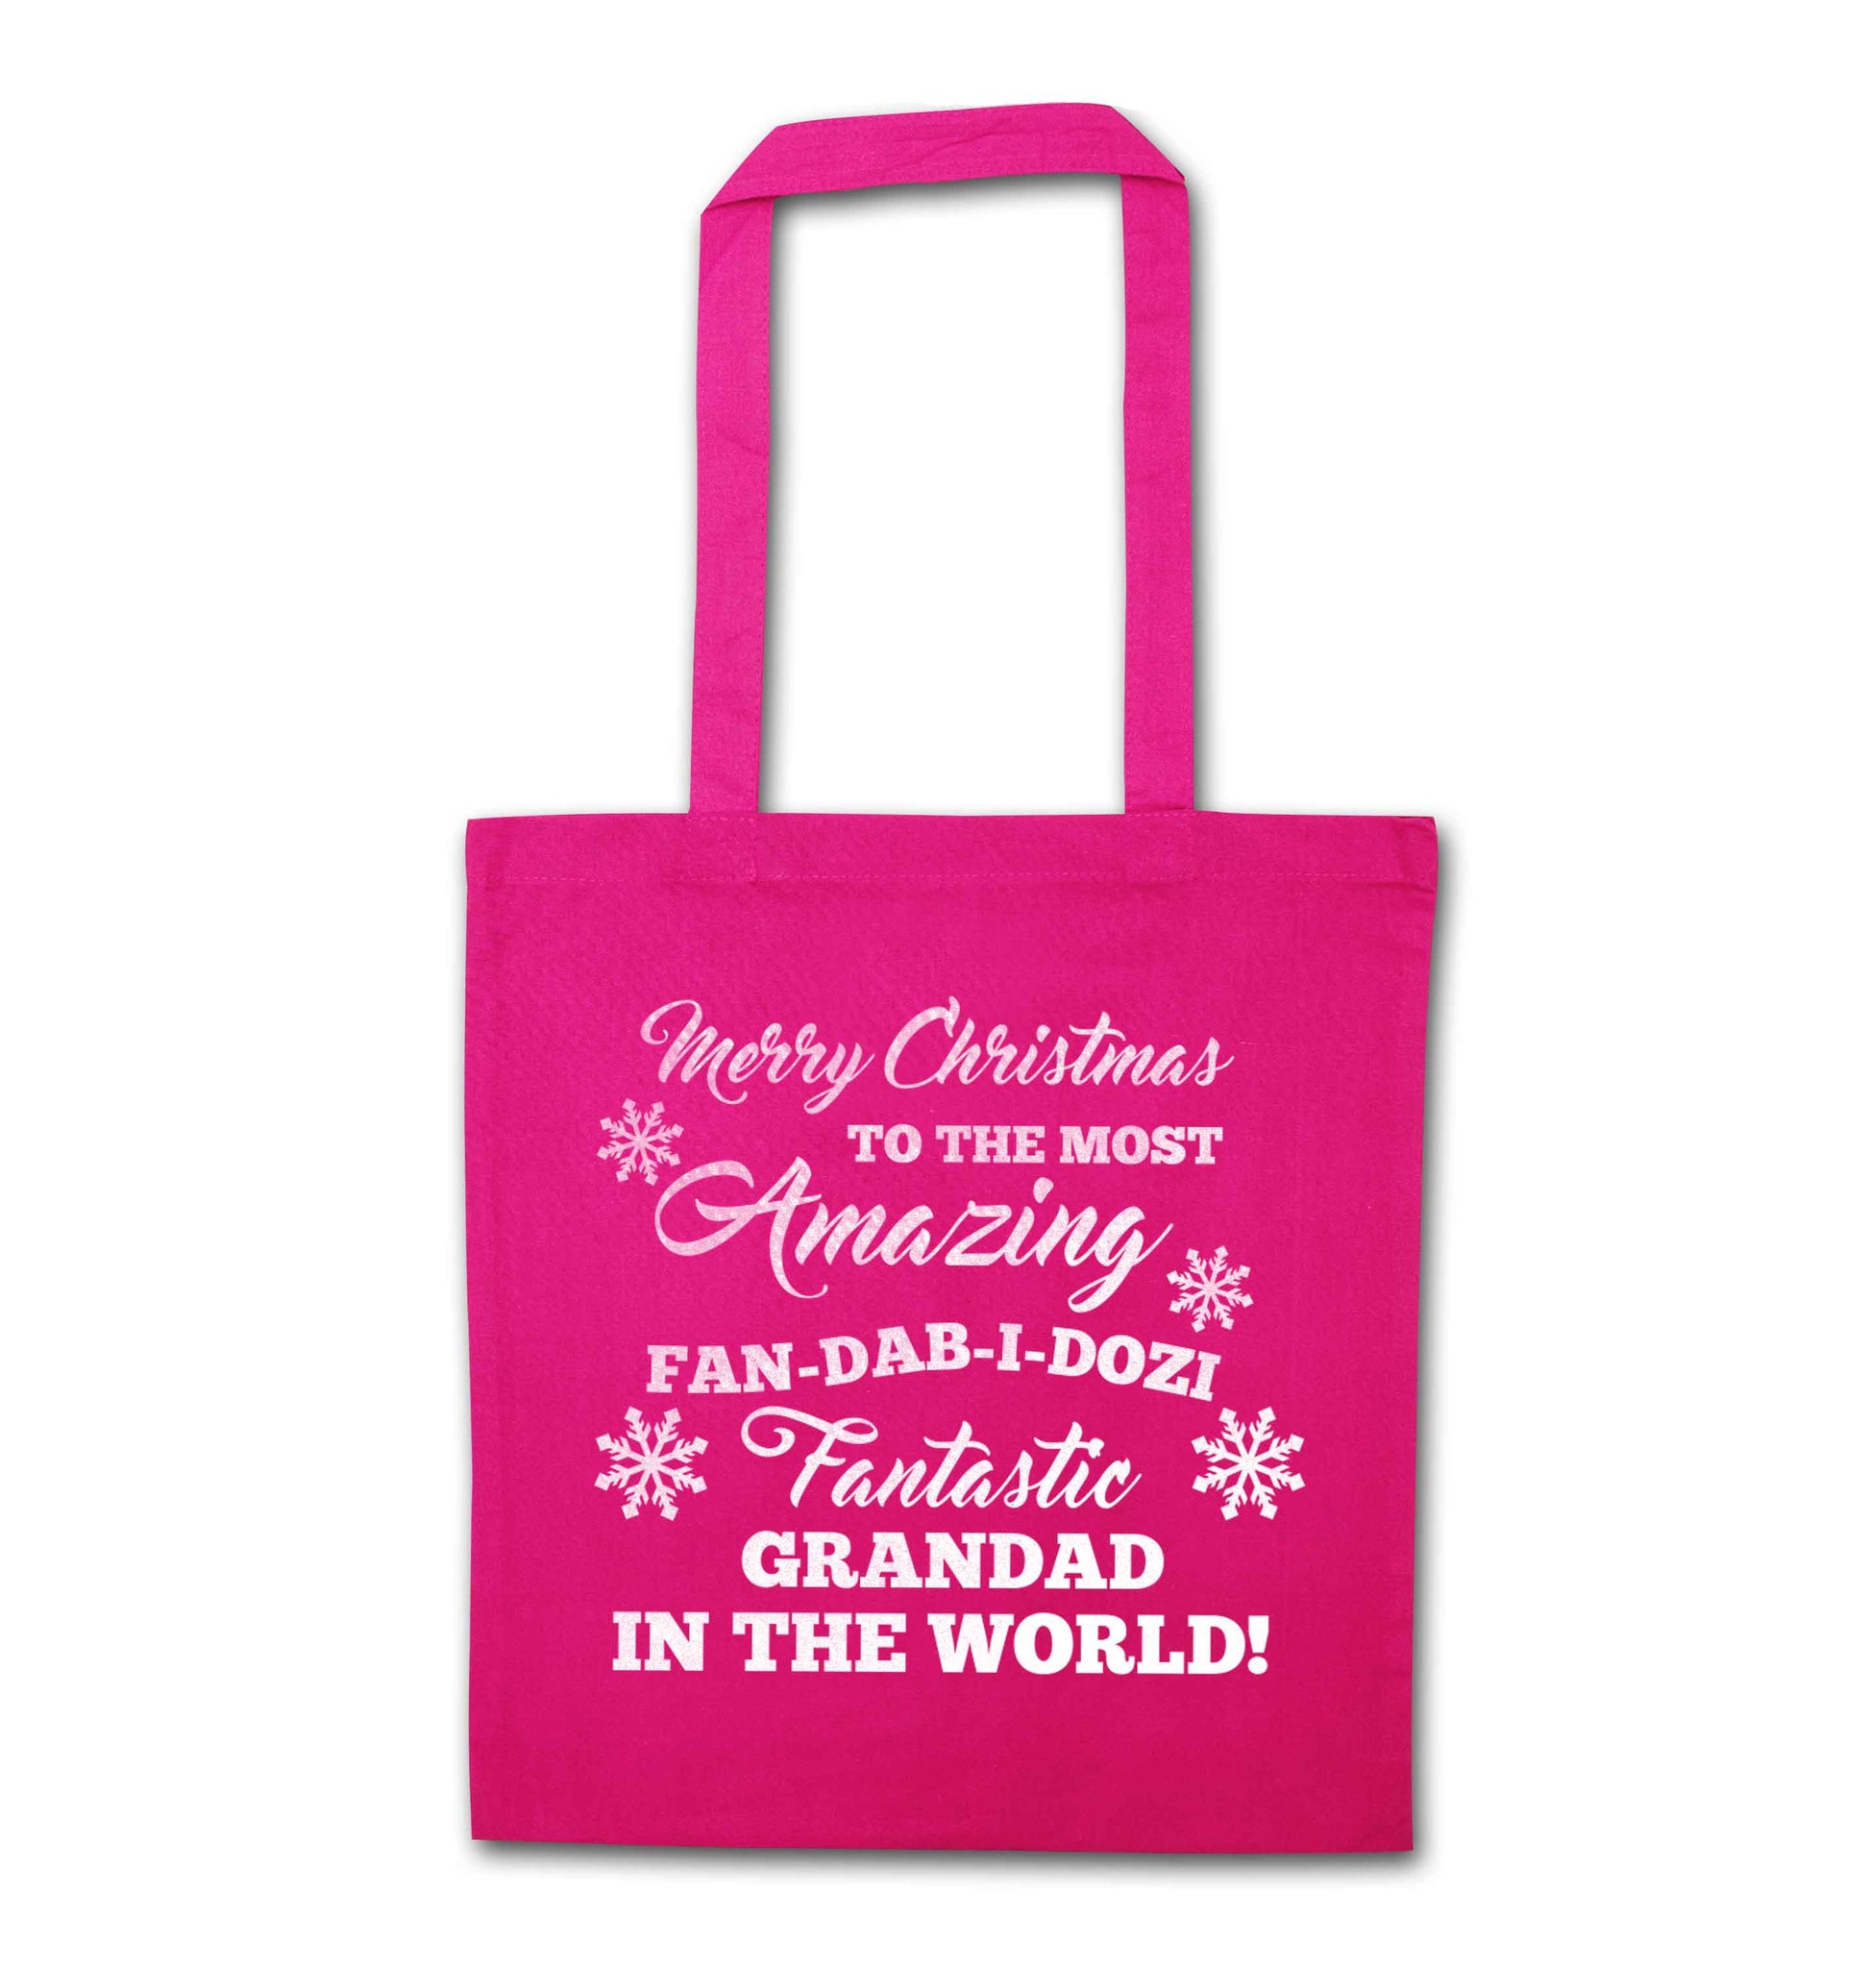 Merry Christmas to the most amazing fan-dab-i-dozi fantasic Grandad in the world pink tote bag